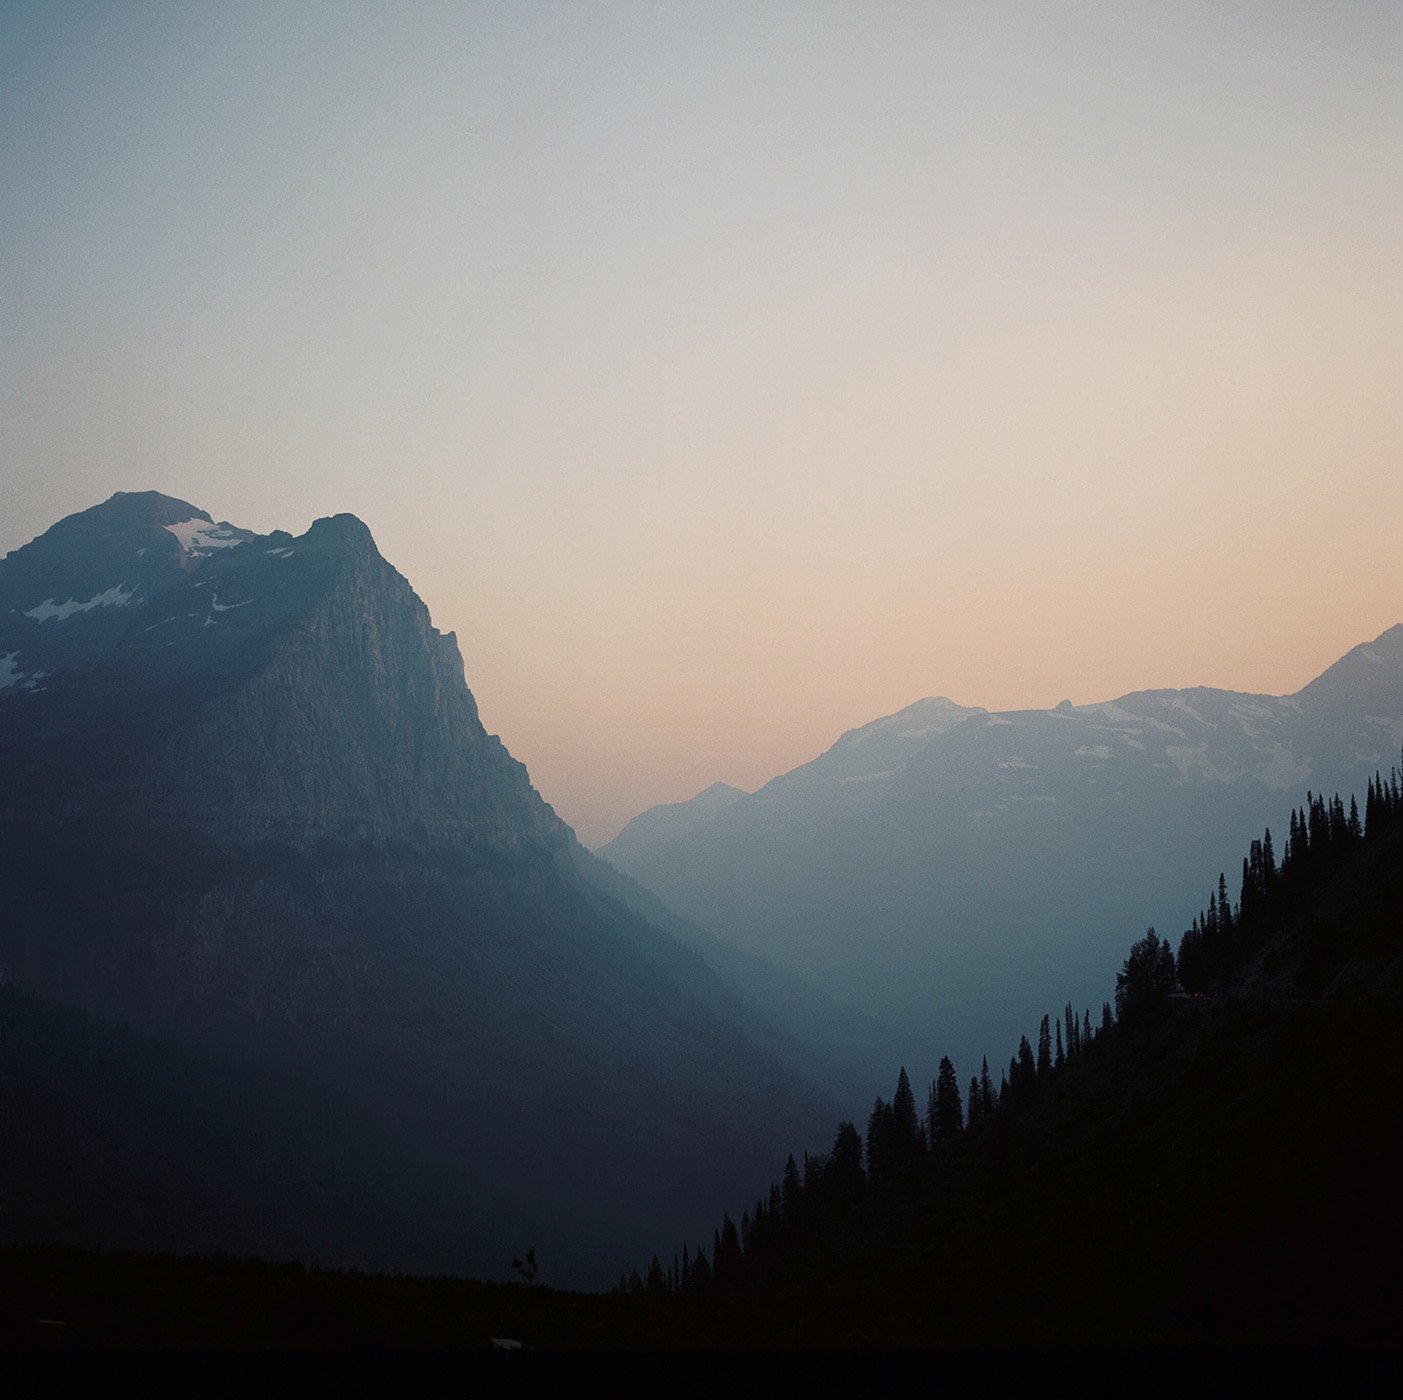 A hazy sunset over snow capped mountains in Montana shot by Abigail Bobo for First Opportunity Bank